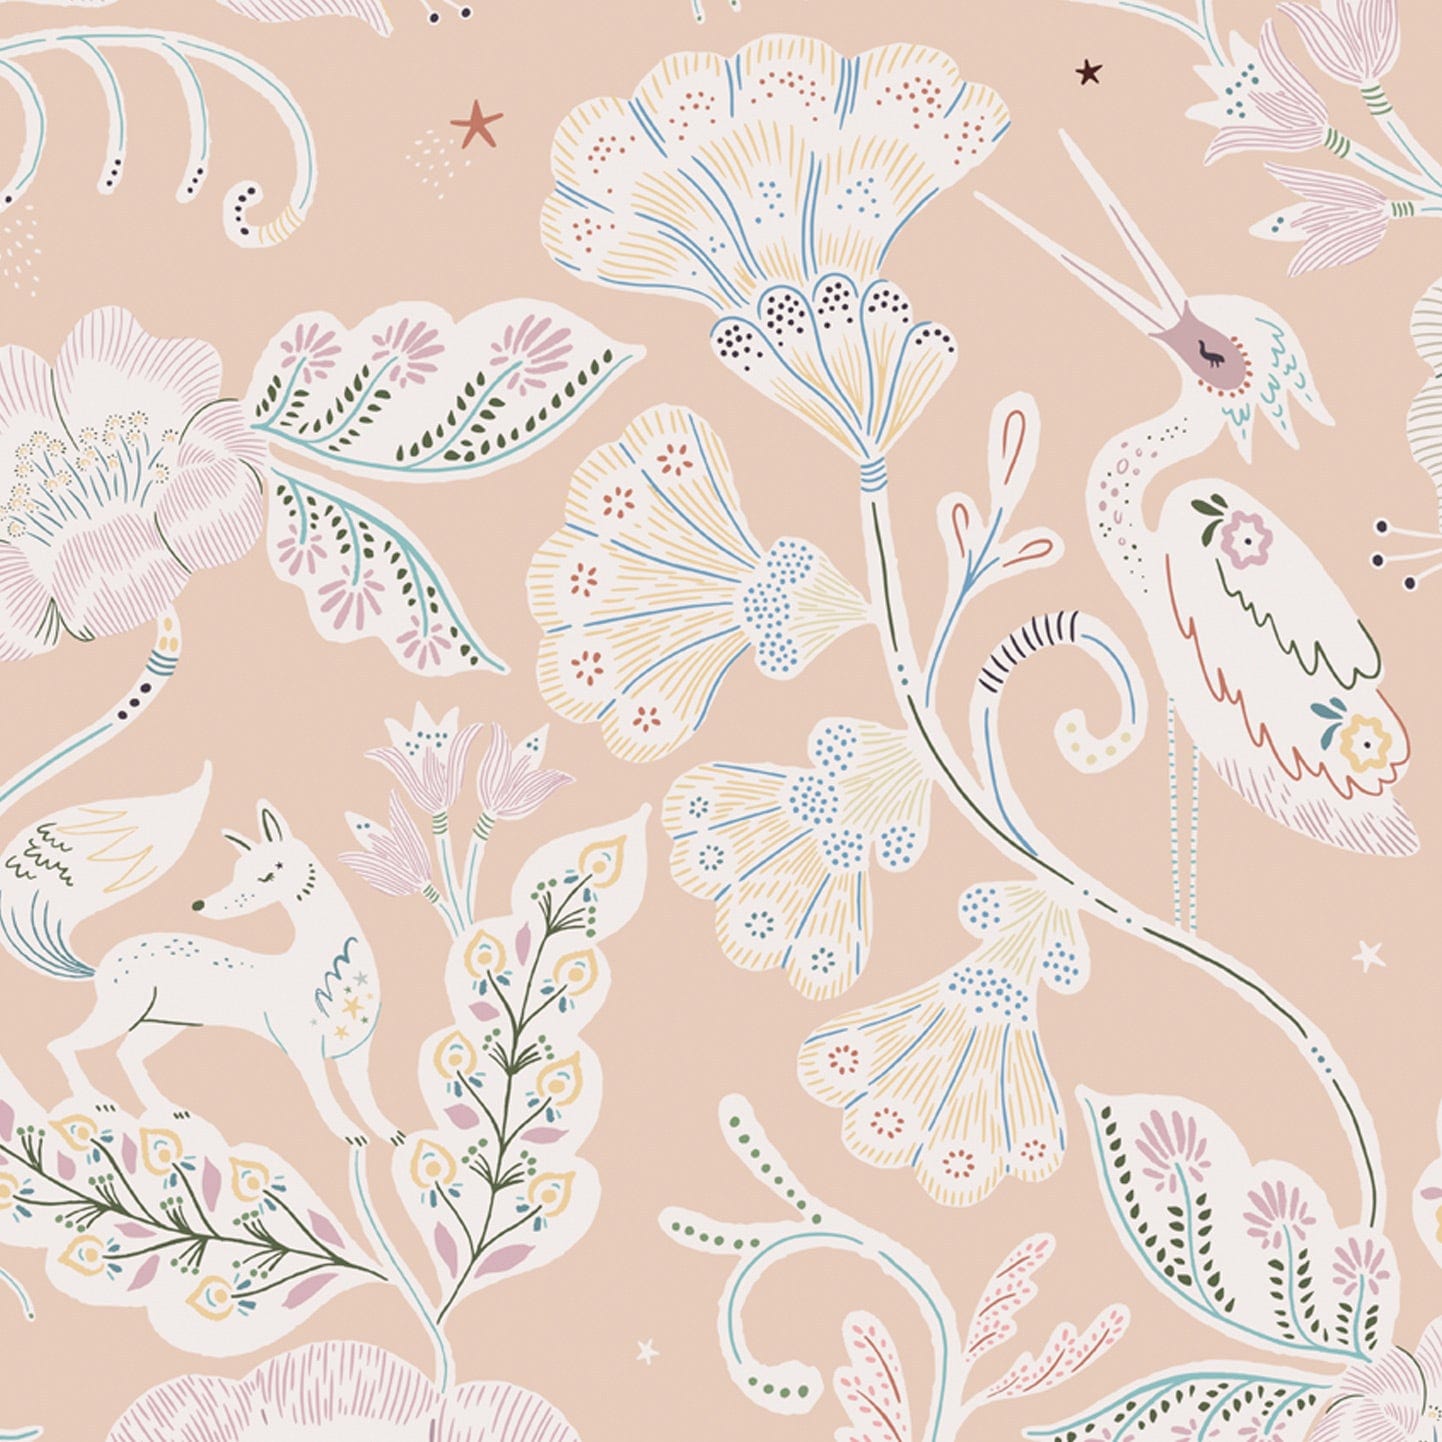 Wallpaper sample with a peach background and white animals such as storks and wolves with pretty floral patterns. 